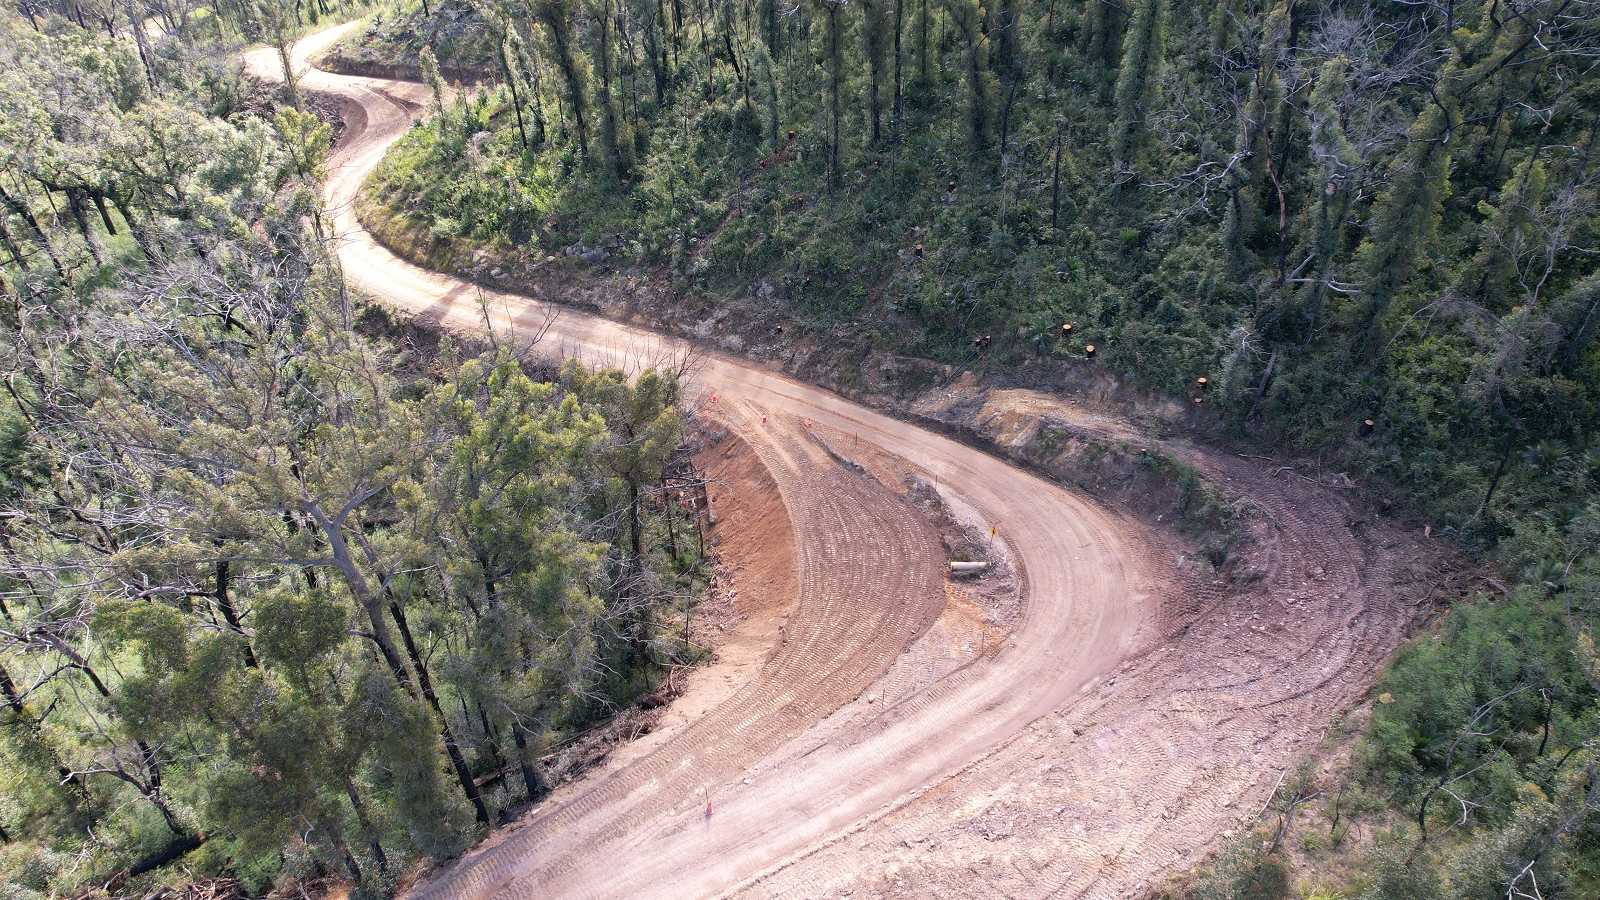 A dirt road winds through recovering forest